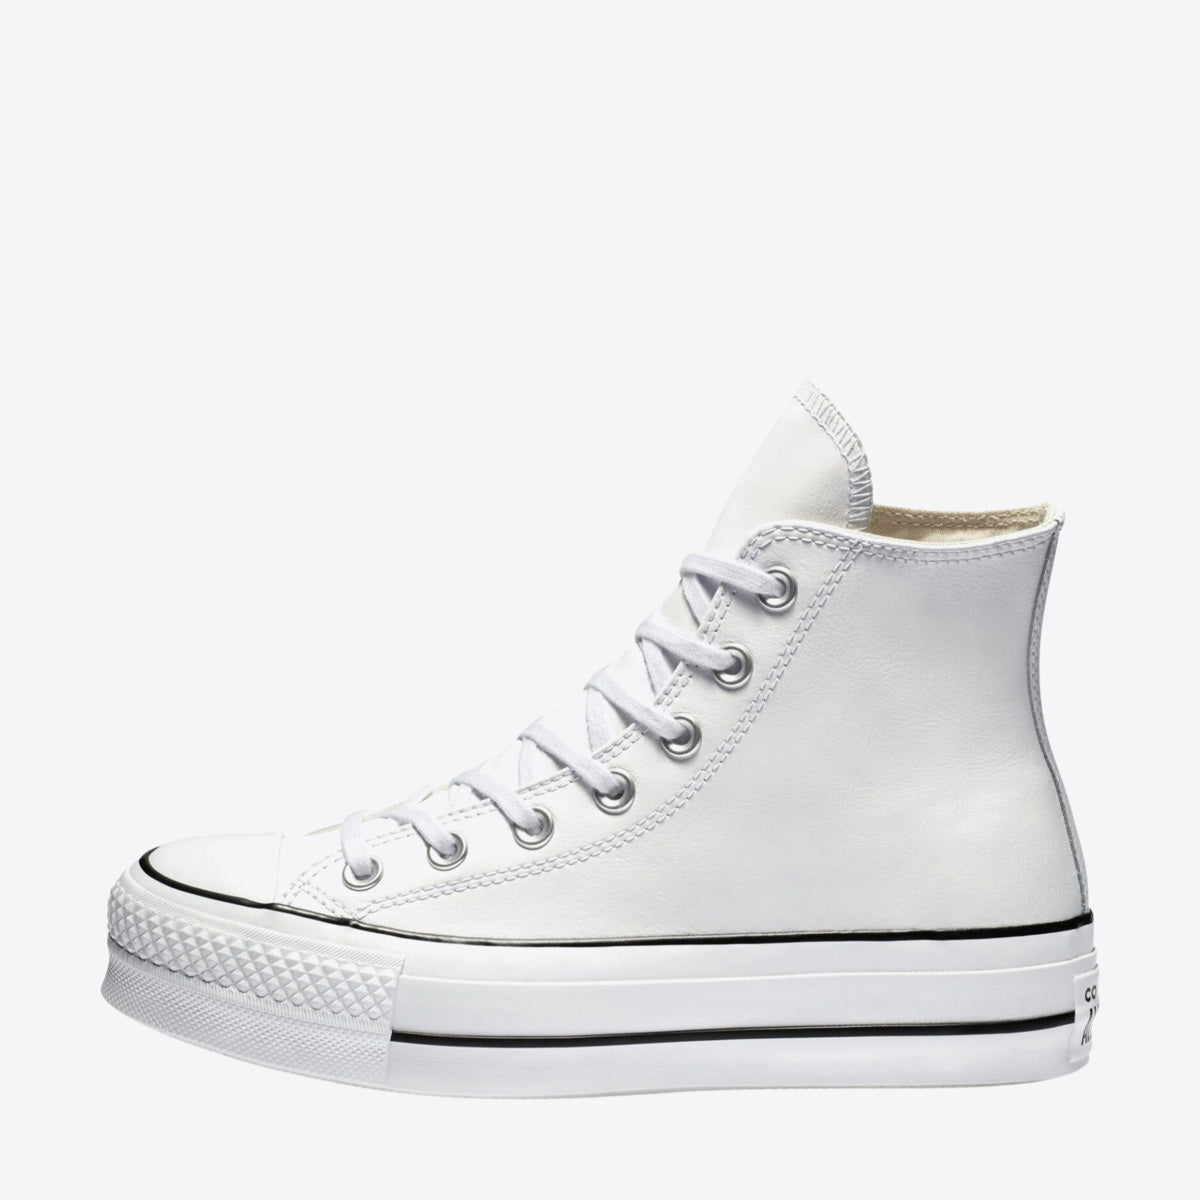  Chuck Taylor All Star Lift Hi White Leather